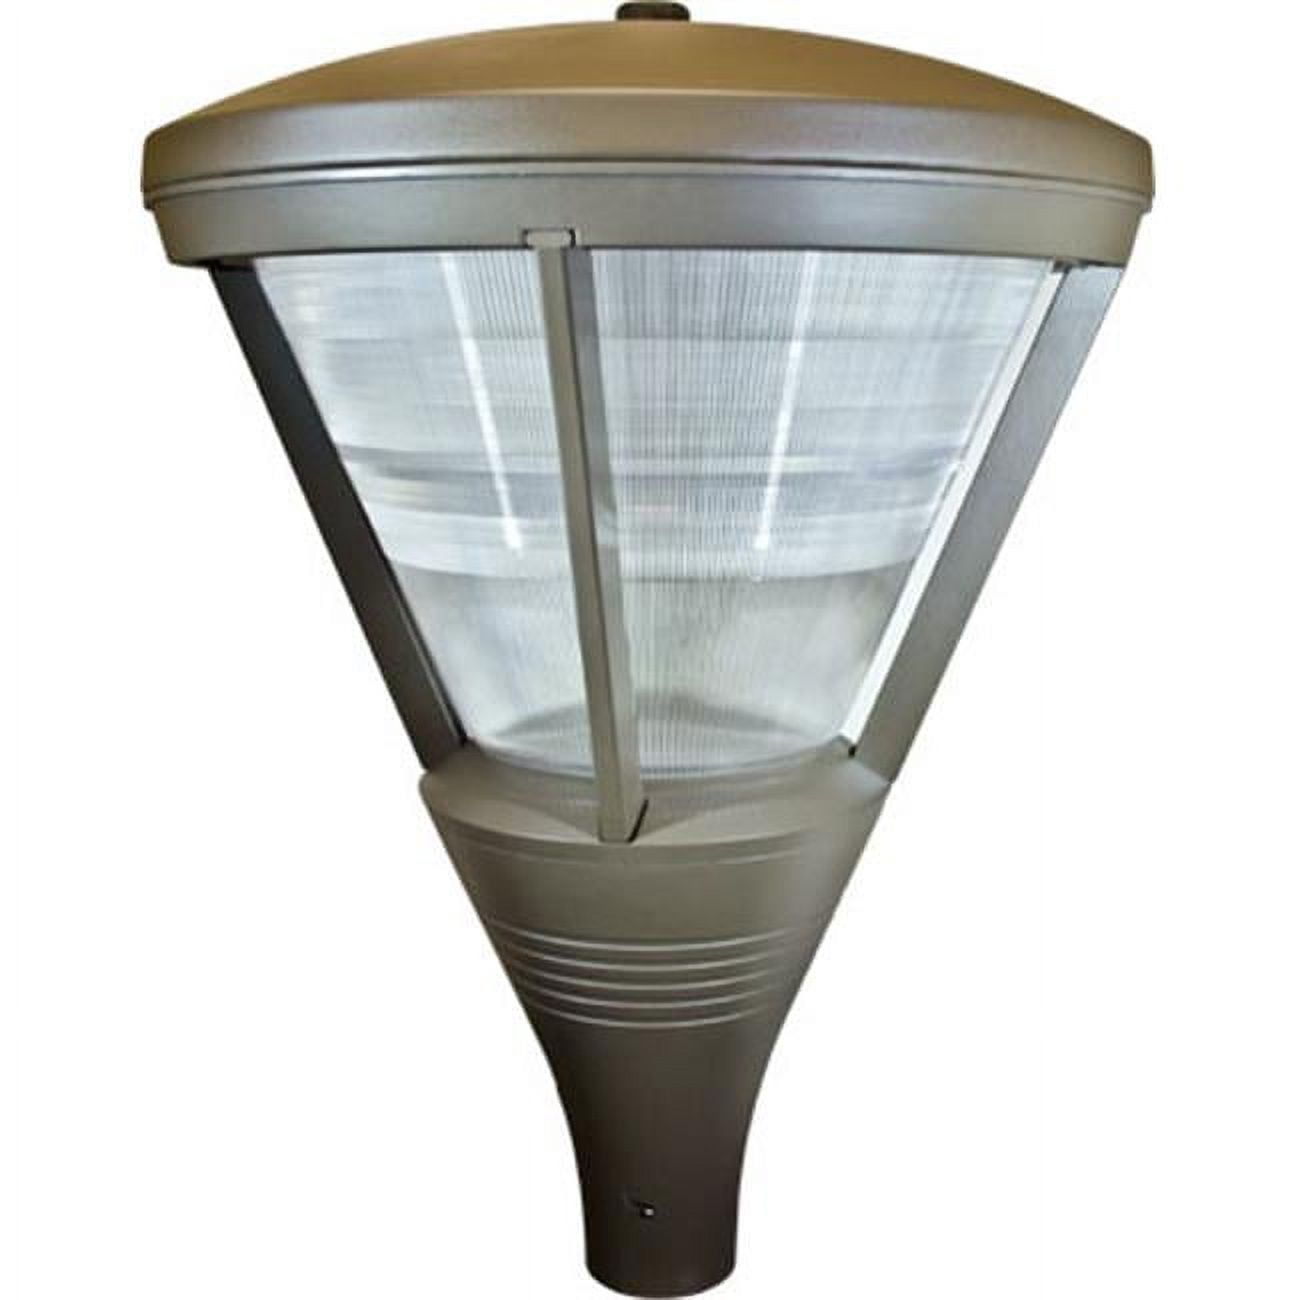 Picture of Dabmar Lighting GM580-BZ-MT Powder Coated Cast Aluminum Architectural Post Top Light Fixture, Bronze - 34.50 x 25.25 x 25.25 in.